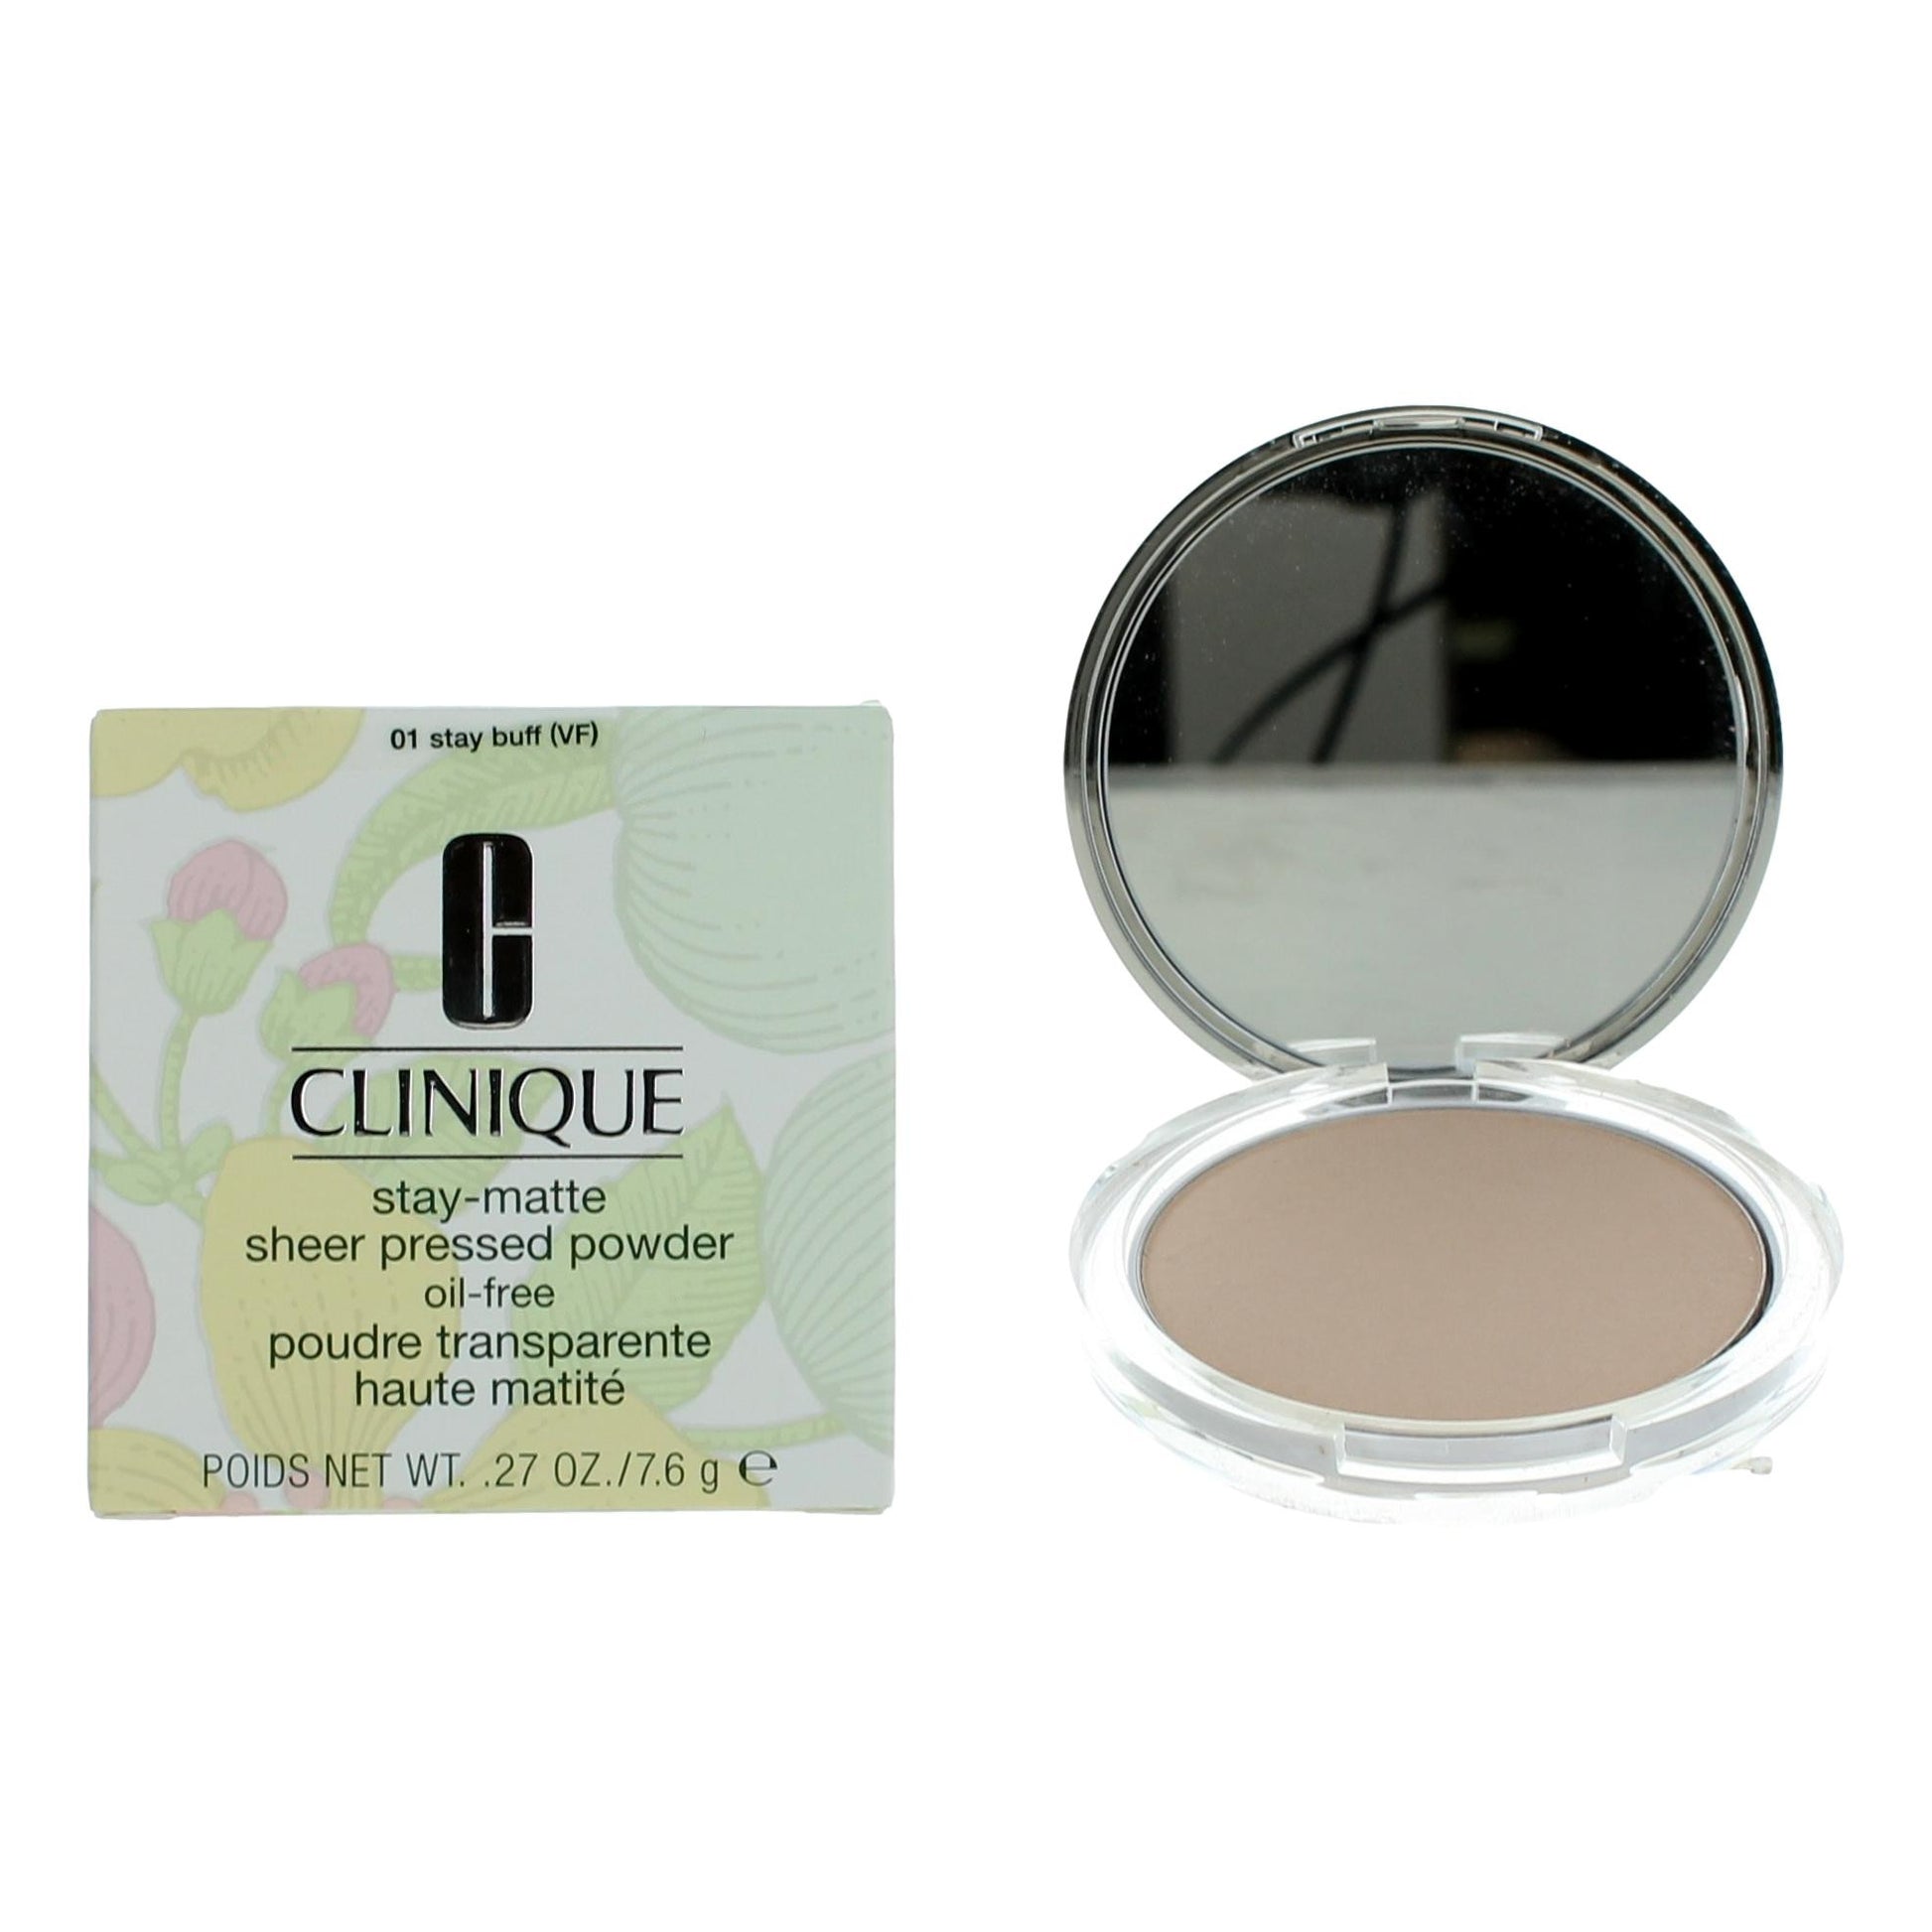 Clinique Stay-Matte by Clinique, .27oz Sheer Pressed Powder - 01 Stay Buff - 01 Stay Buff